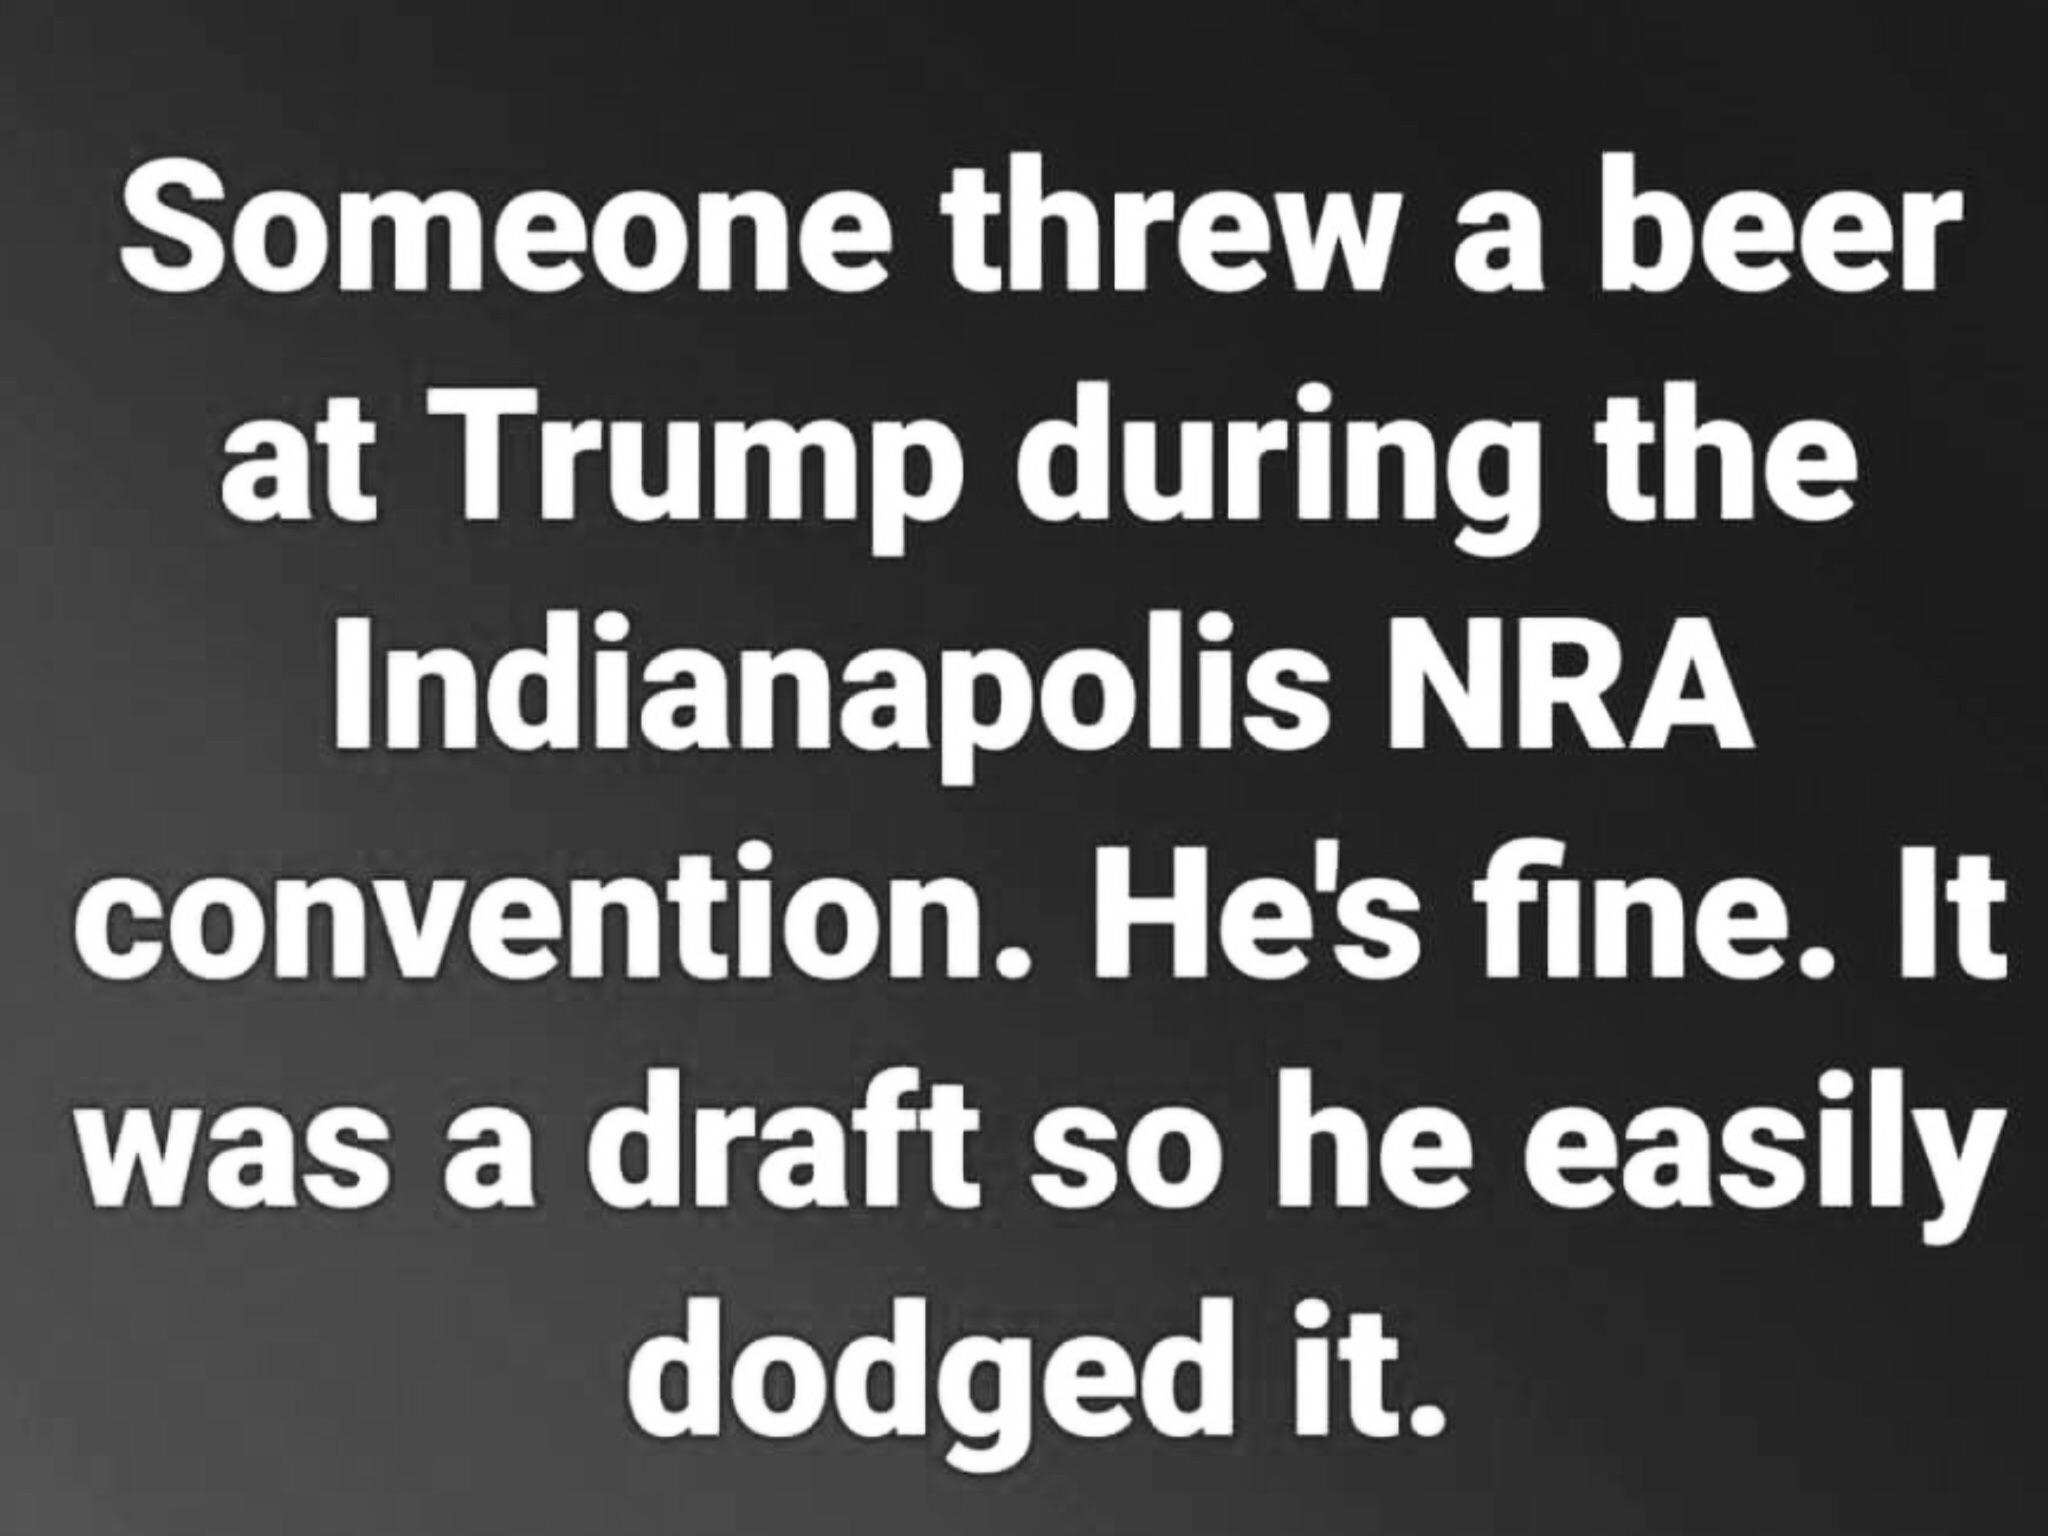 angle - Someone threw a beer at Trump during the Indianapolis Nra convention. He's fine. It was a draft so he easily dodged it.